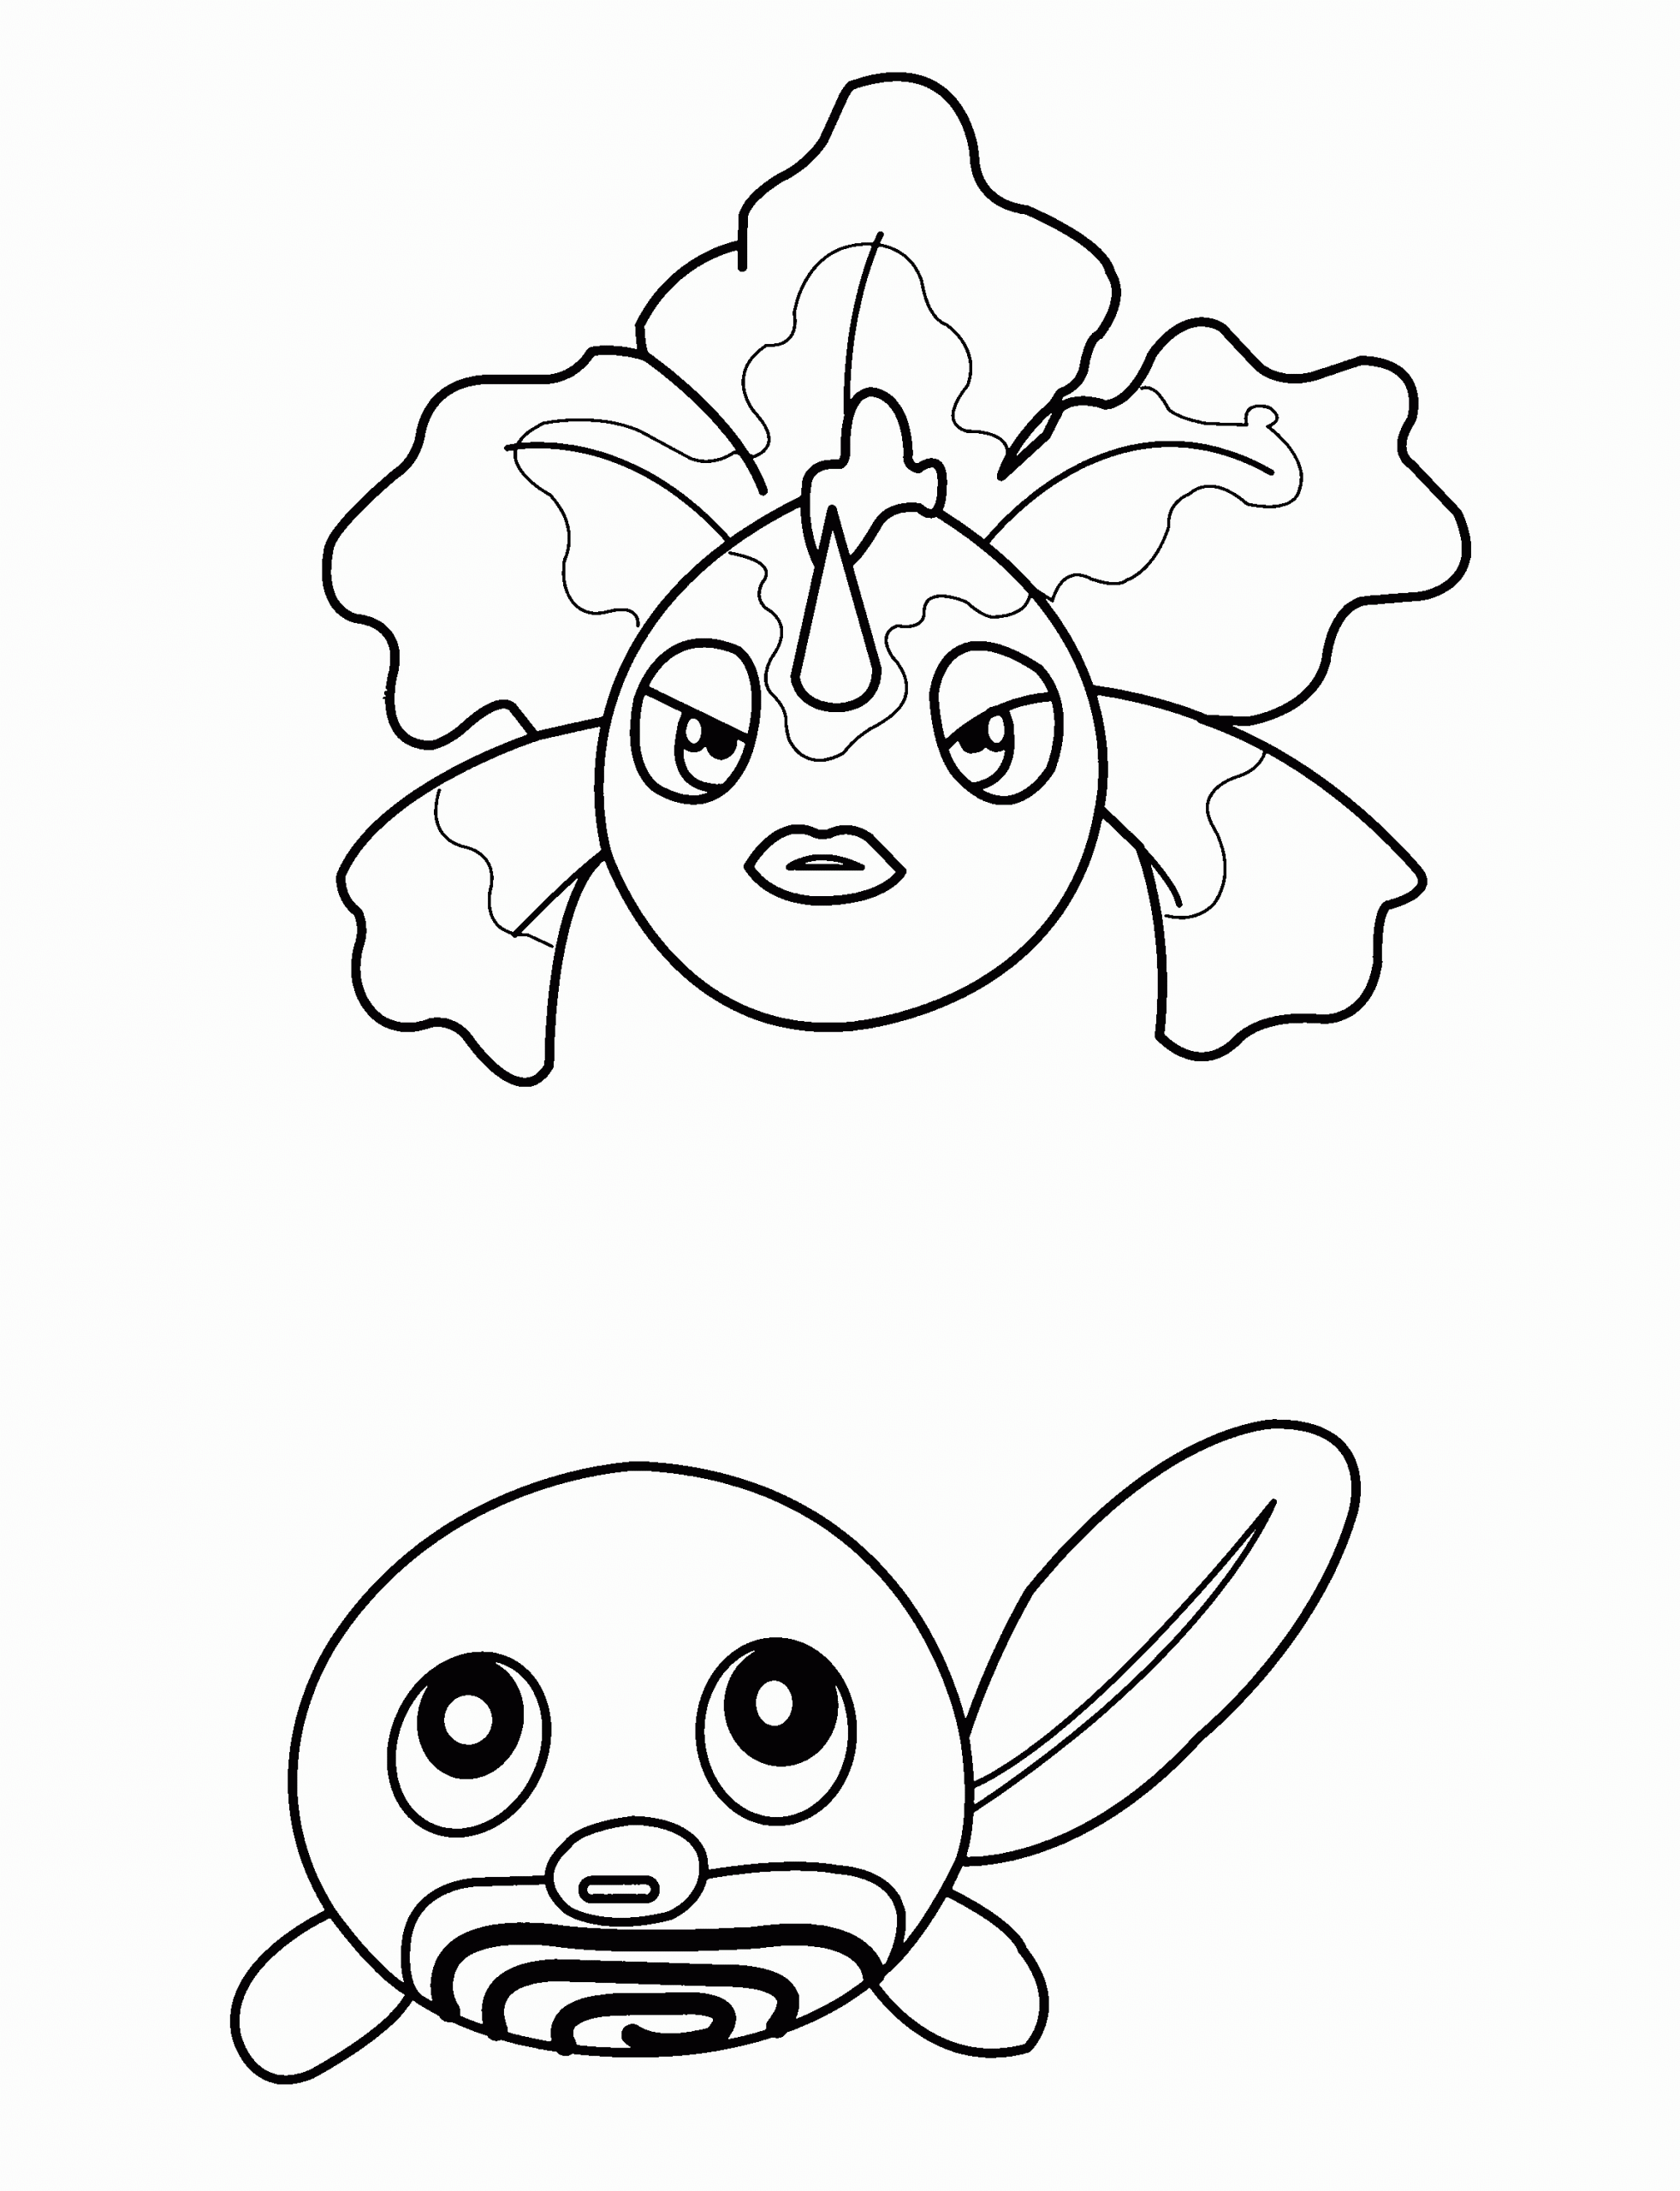 Squirtle Pokemon Coloring Page Lovely Luxe Kleurplaten Pokemon Squirtle In 2020 Pokem